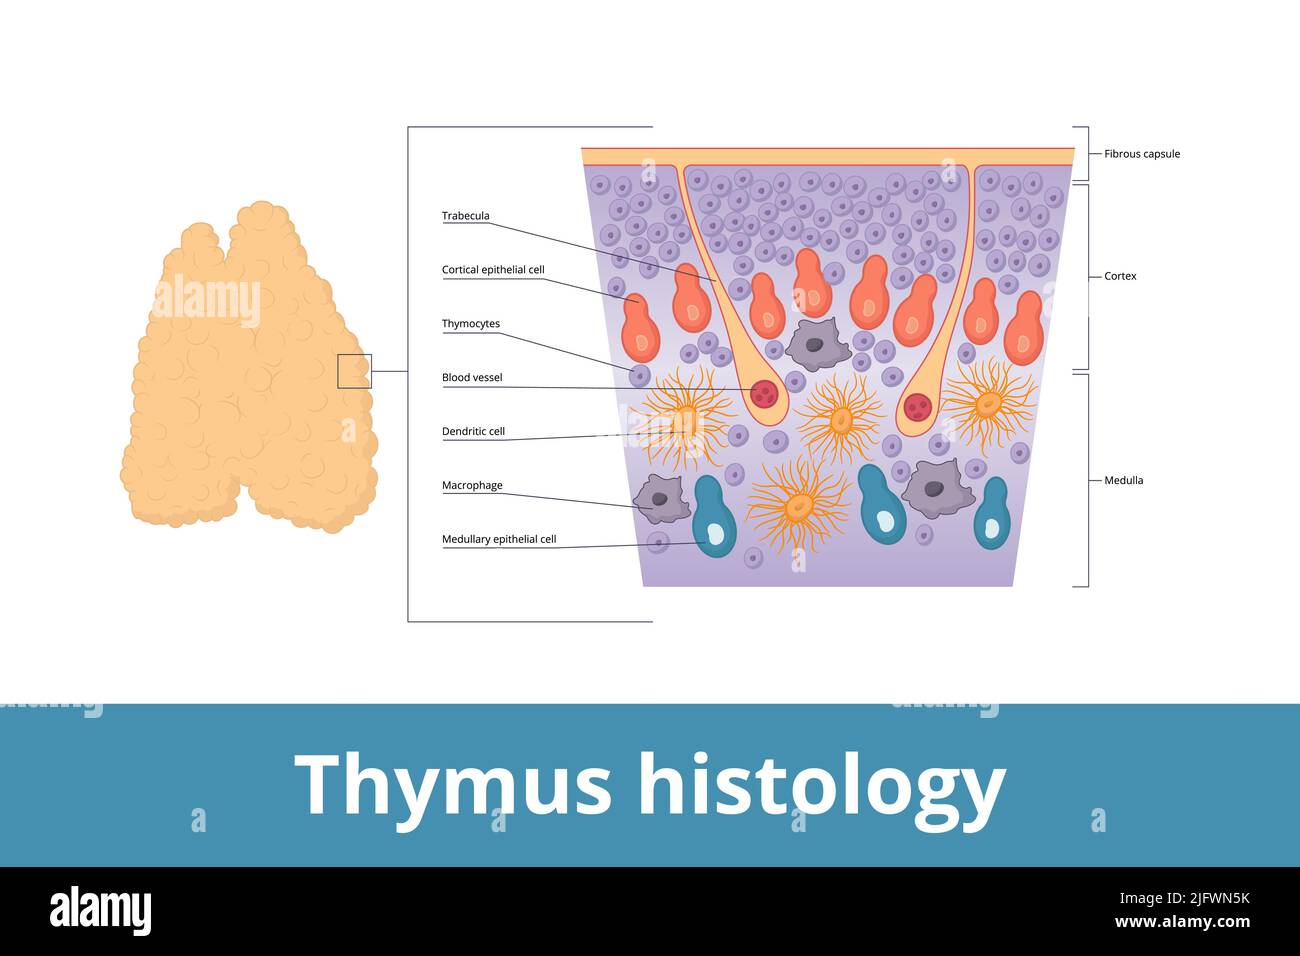 Thymus histology. Visualization of thymus tissue including thymocytes, trabecula, medulla, blood vessels, and cortical epithelial cells. Stock Vector